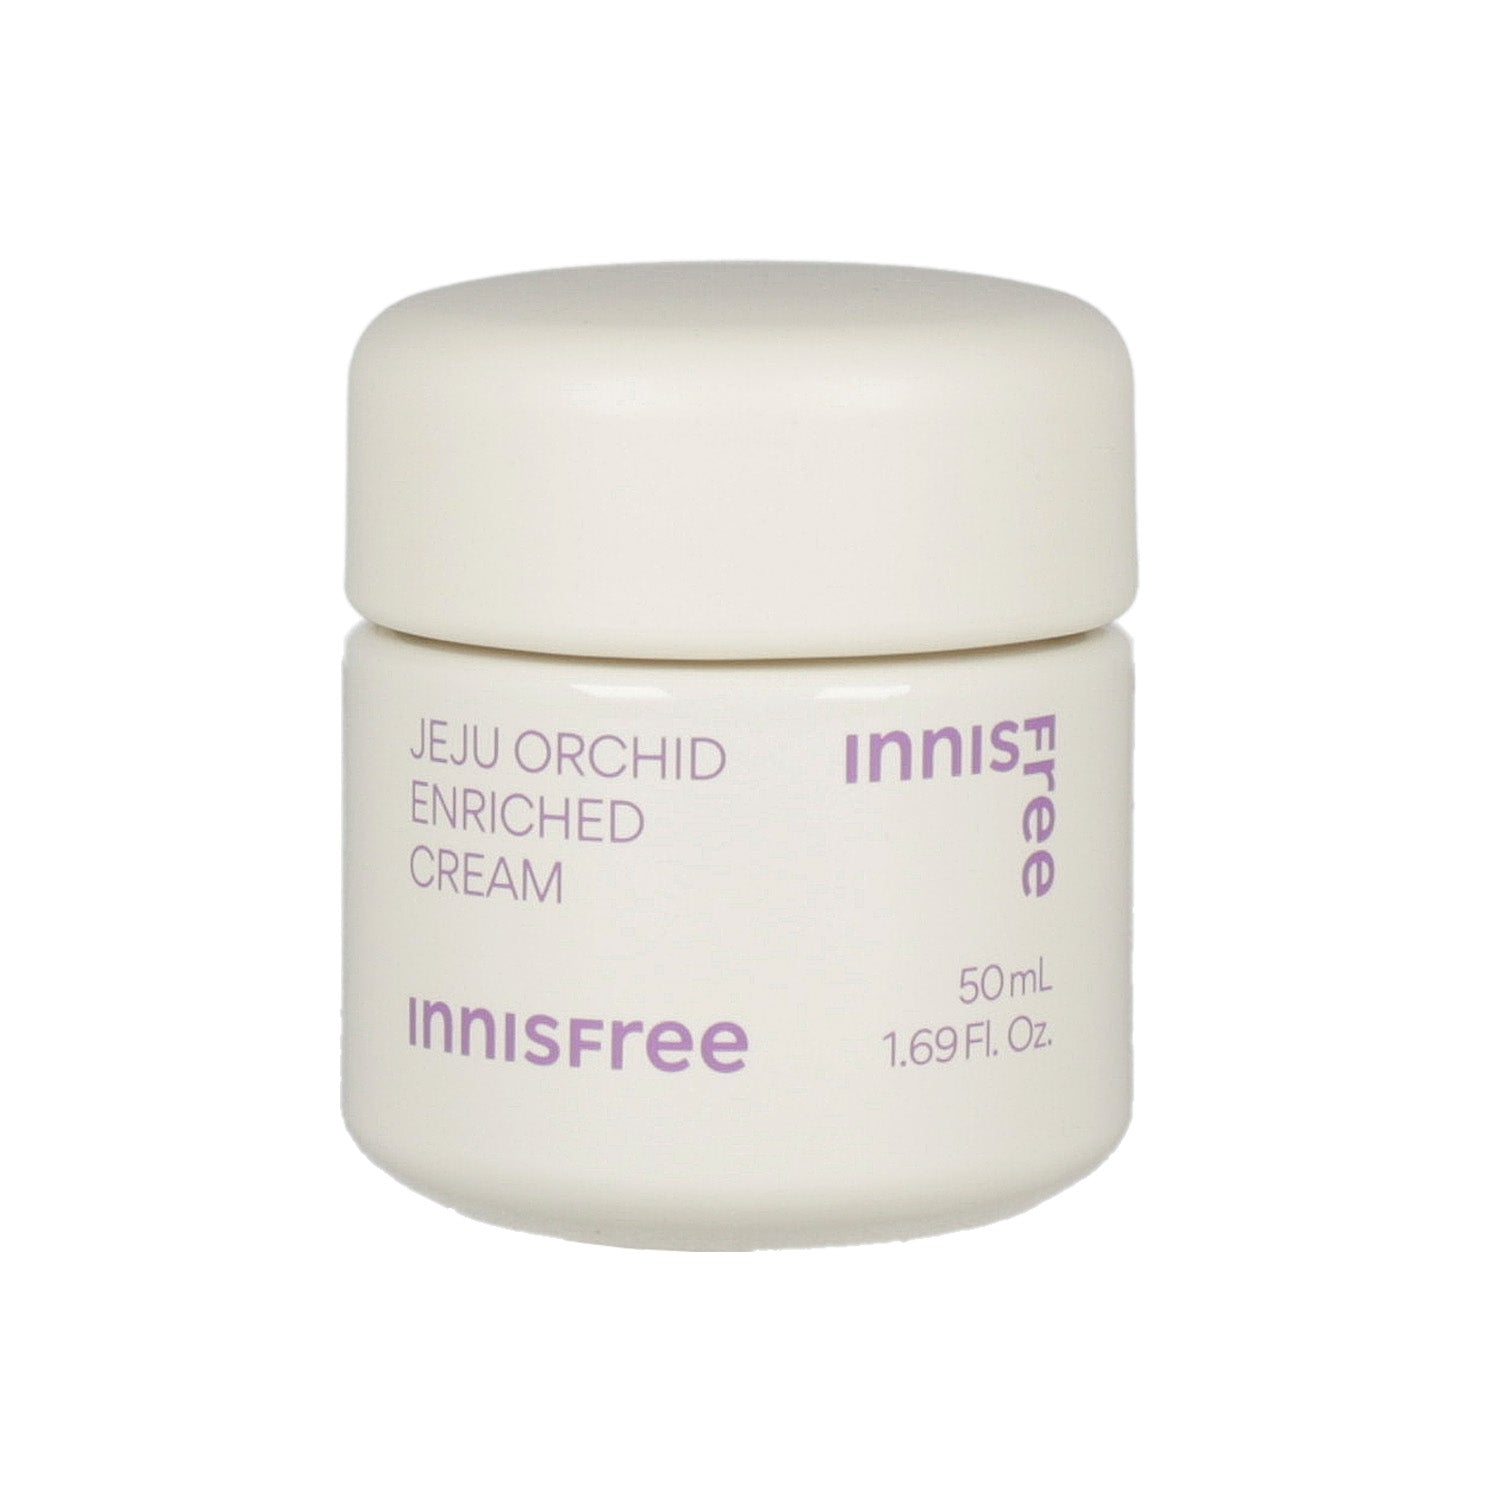 Offers a thick, creamy texture that deeply moisturizes and revitalizes the skin.